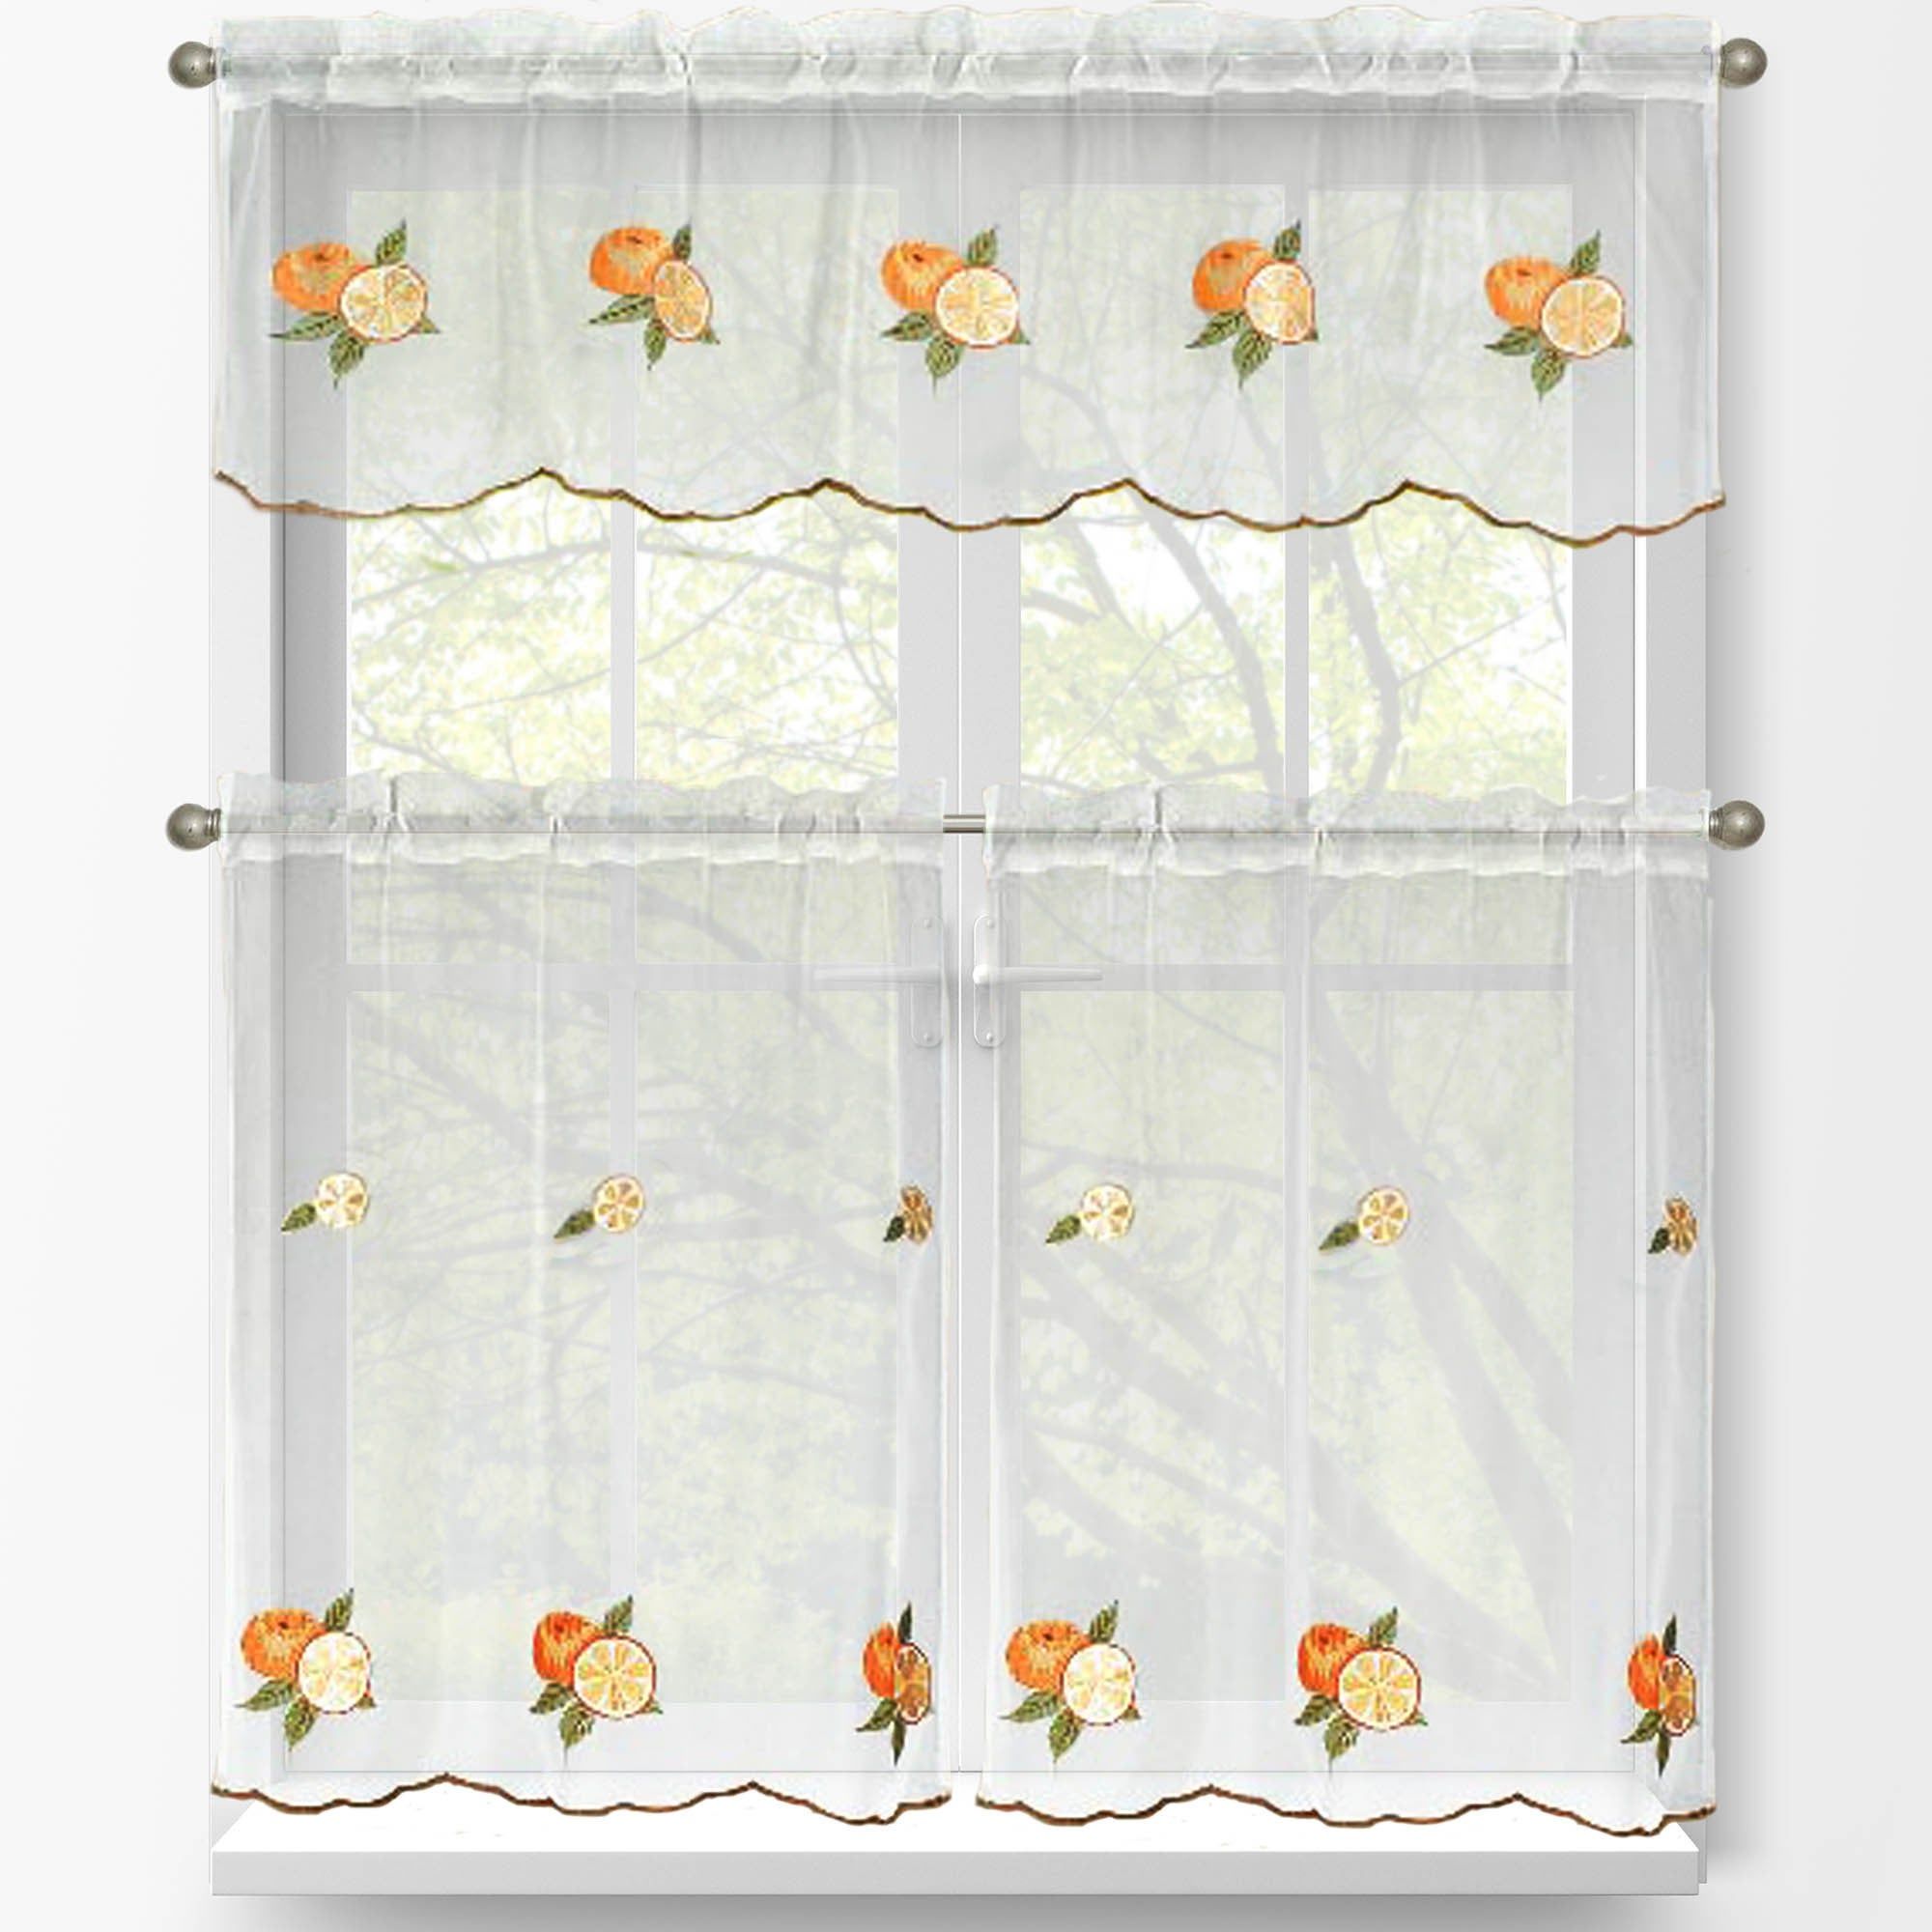 Window Elements Embroidered 3 Piece Kitchen Tier And Valance Set Intended For Coffee Drinks Embroidered Window Valances And Tiers (View 18 of 20)